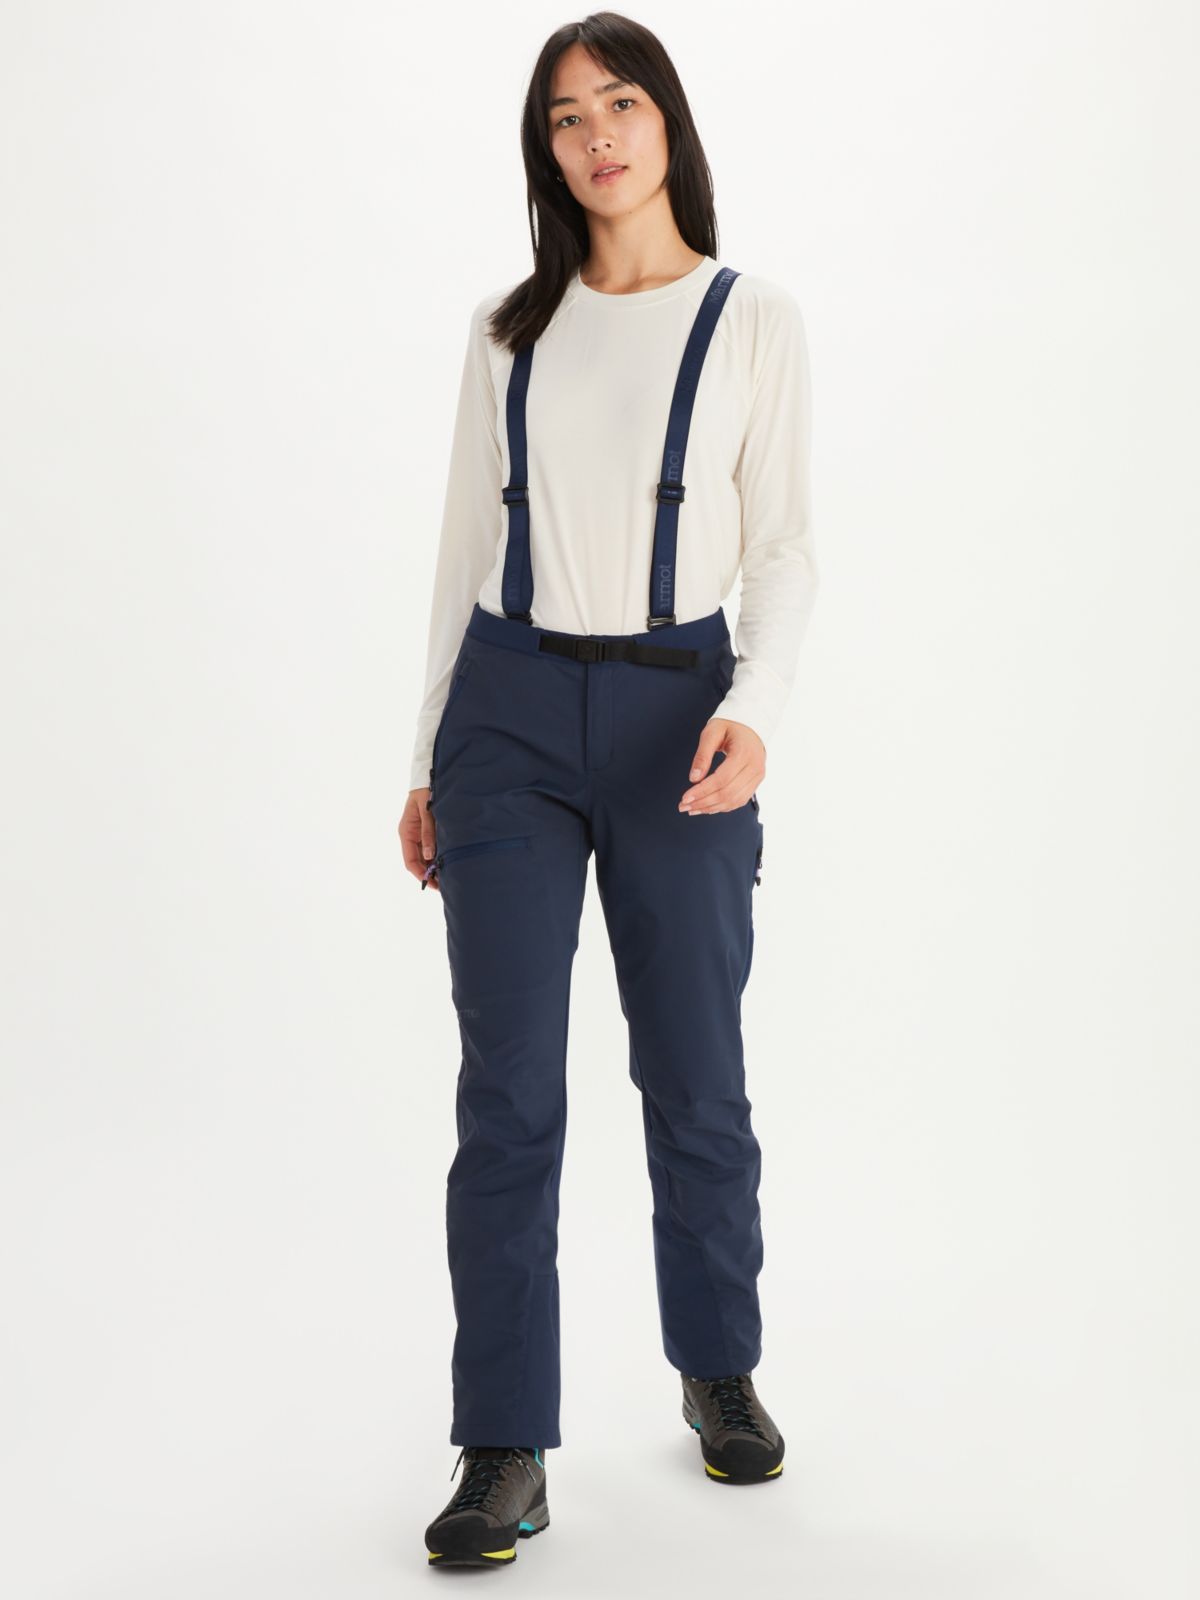 female model wearing snow pants with overalls